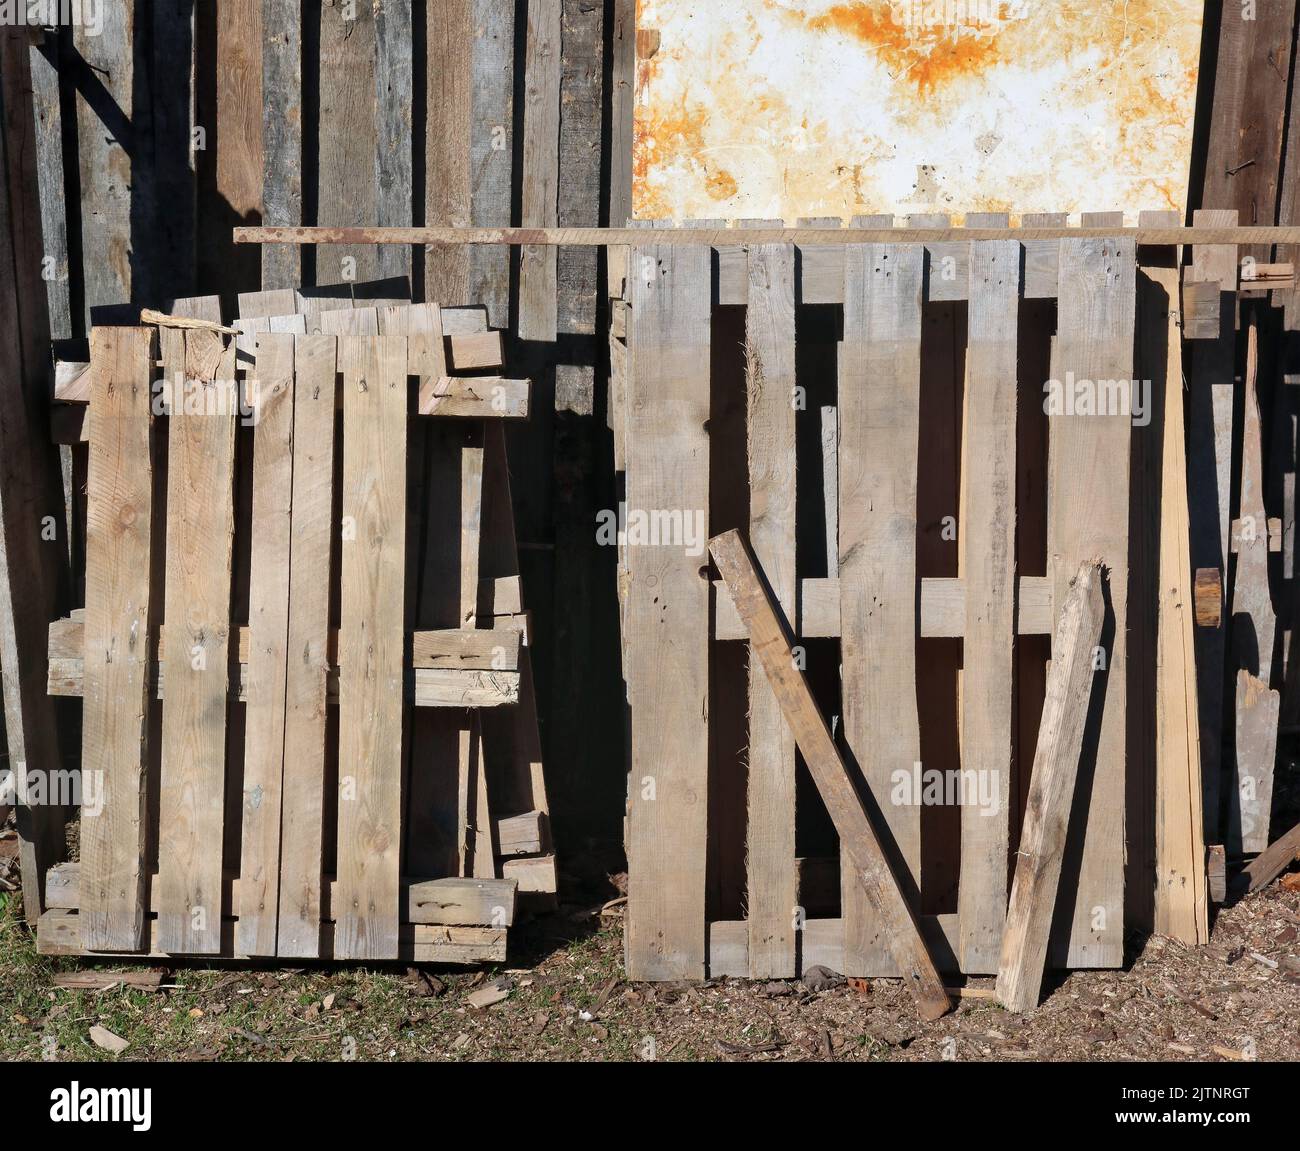 Old used wooden pallets near a rustic  barn Stock Photo